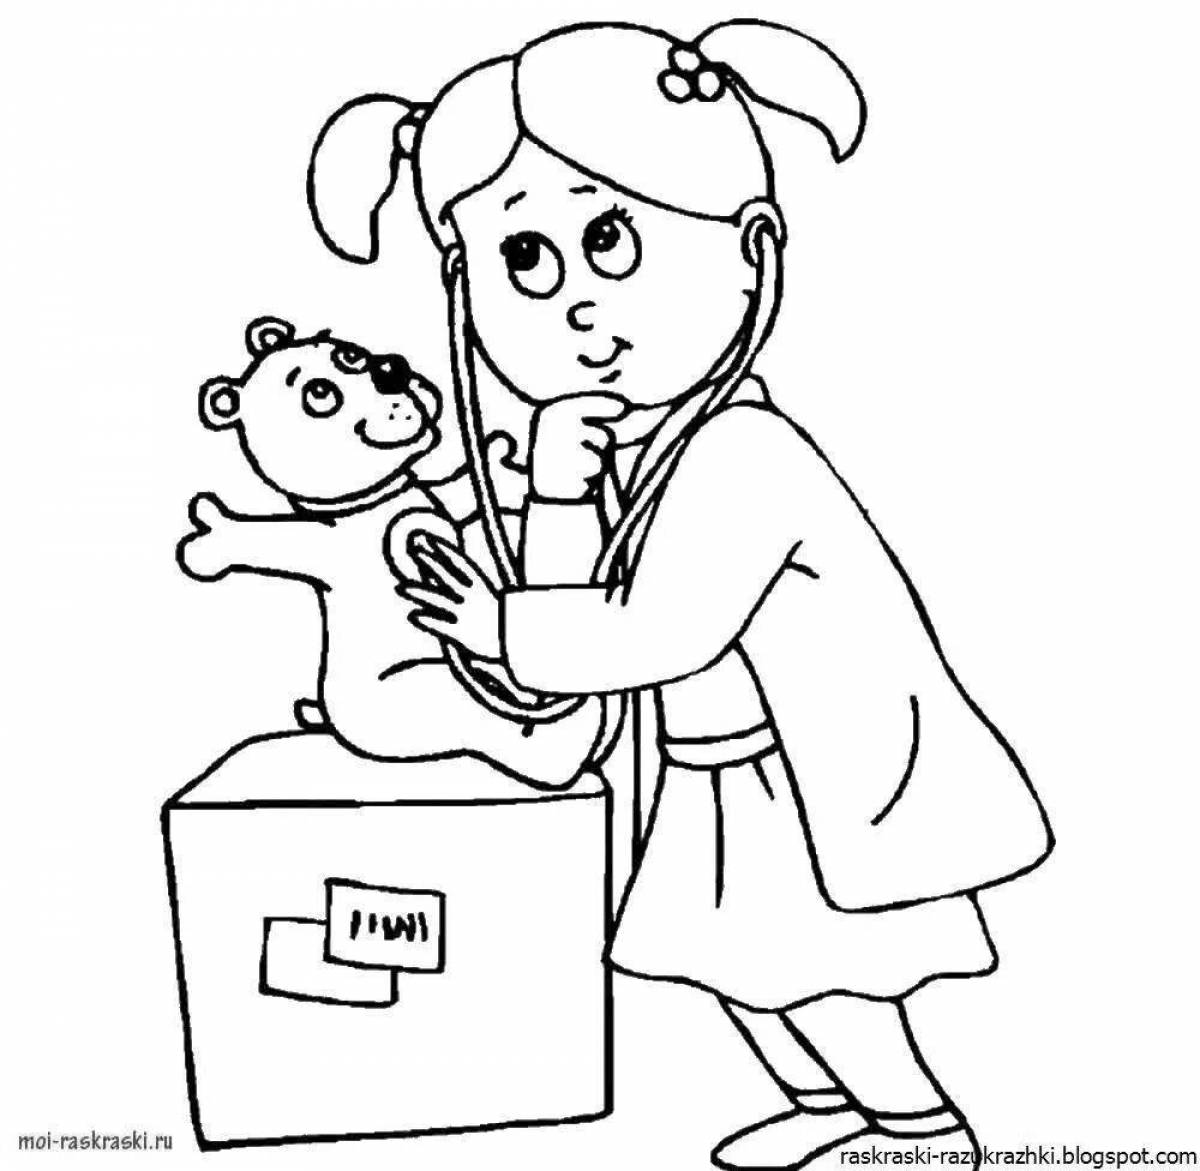 Colorful doctor coloring pages for kids